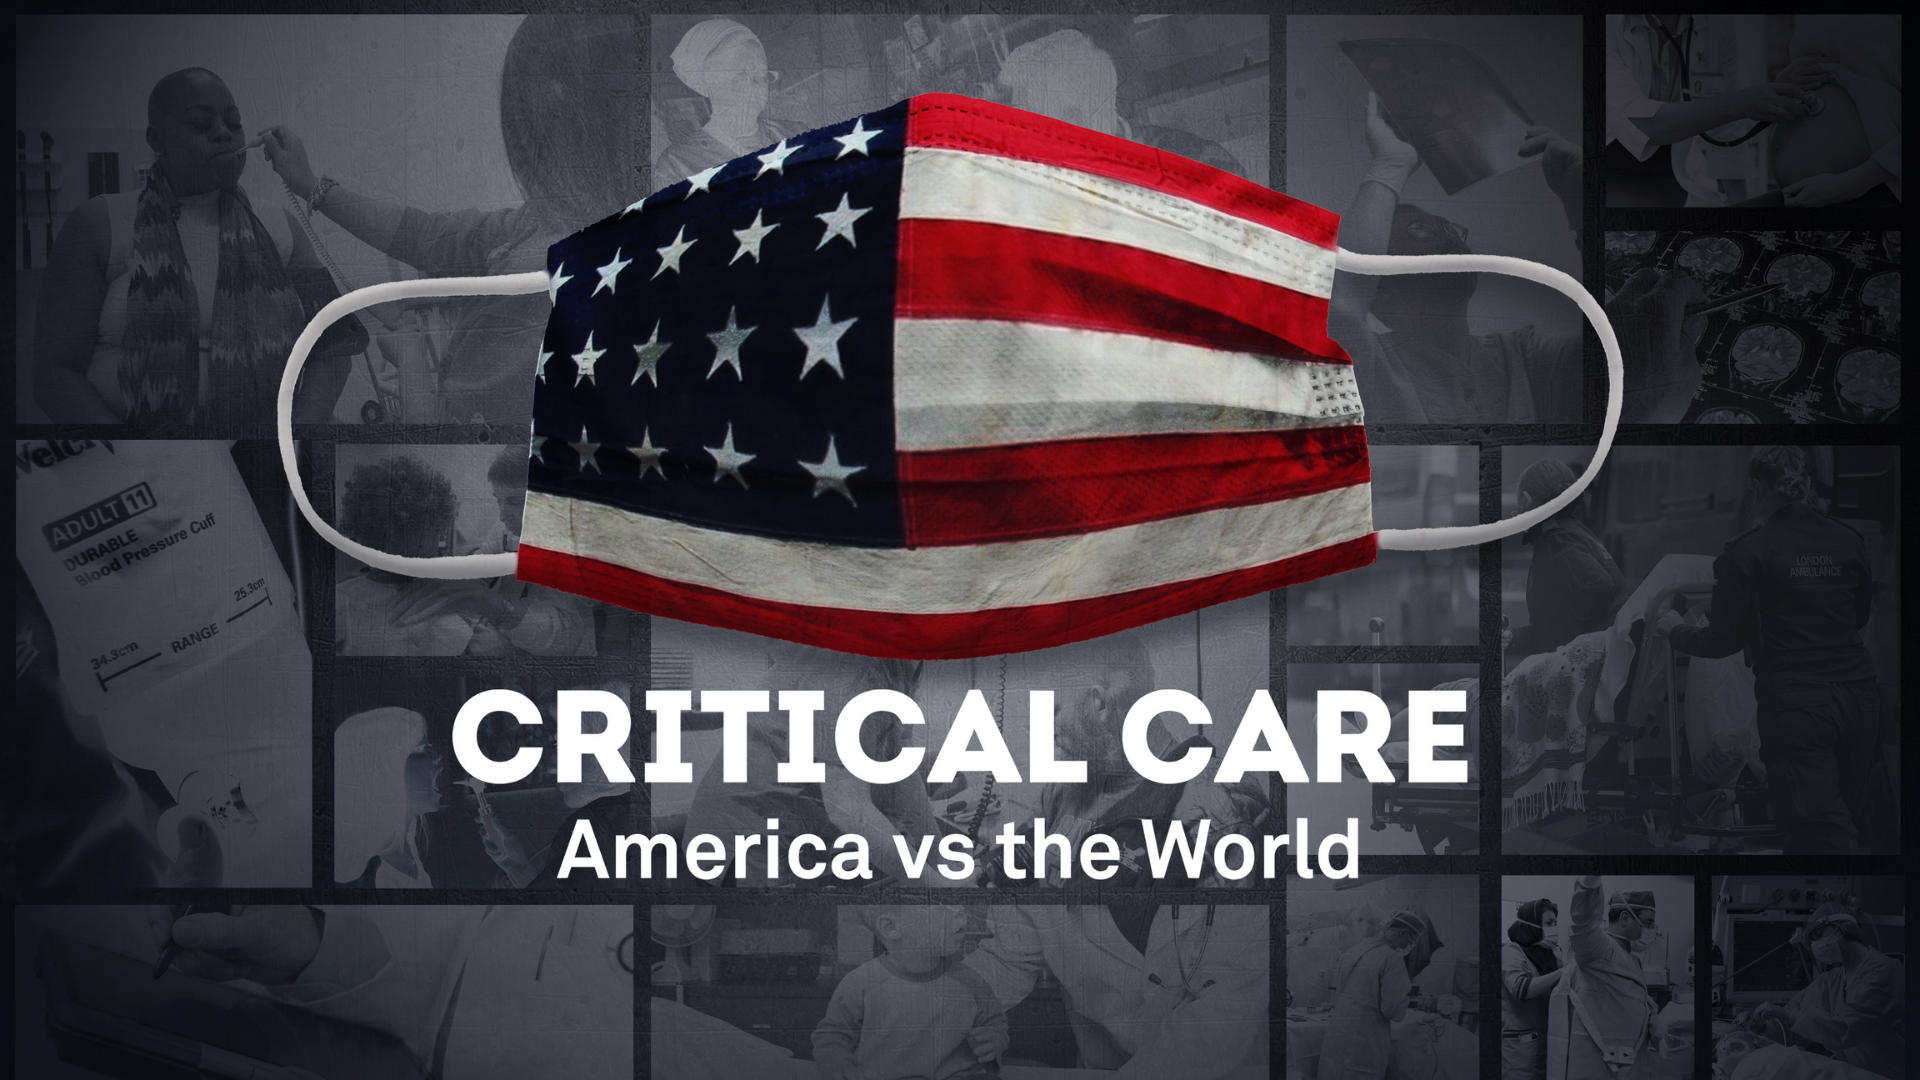 Exploring the Highs and Lows of Americaʻs Fragmented Health Care System Vs. the World